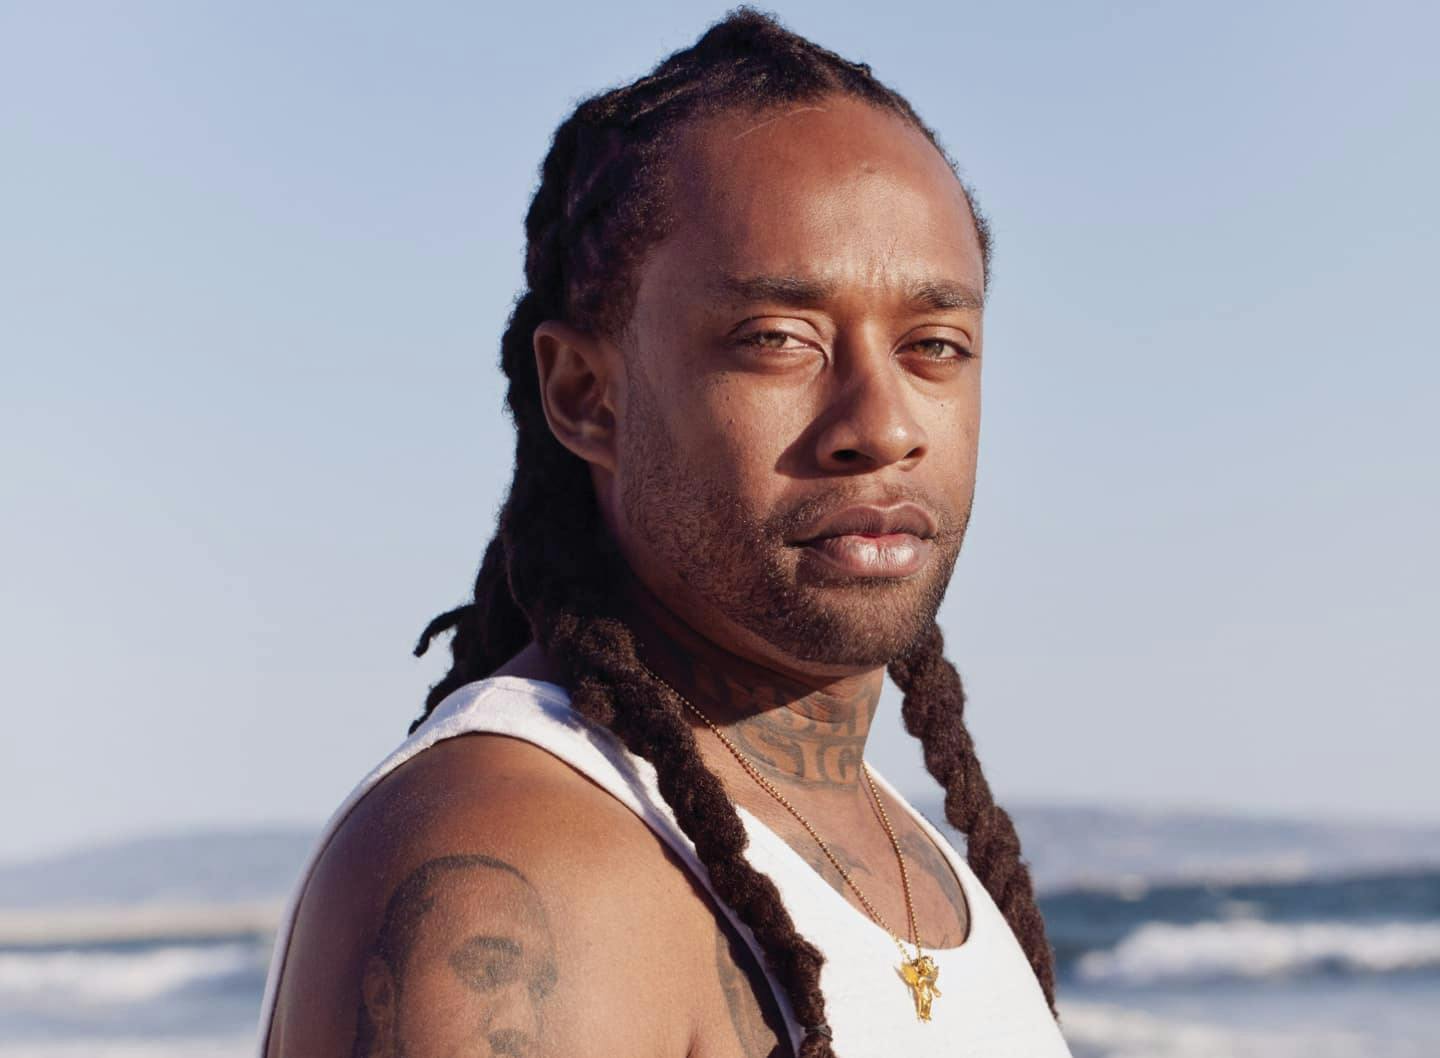 ty dolla ign or nah